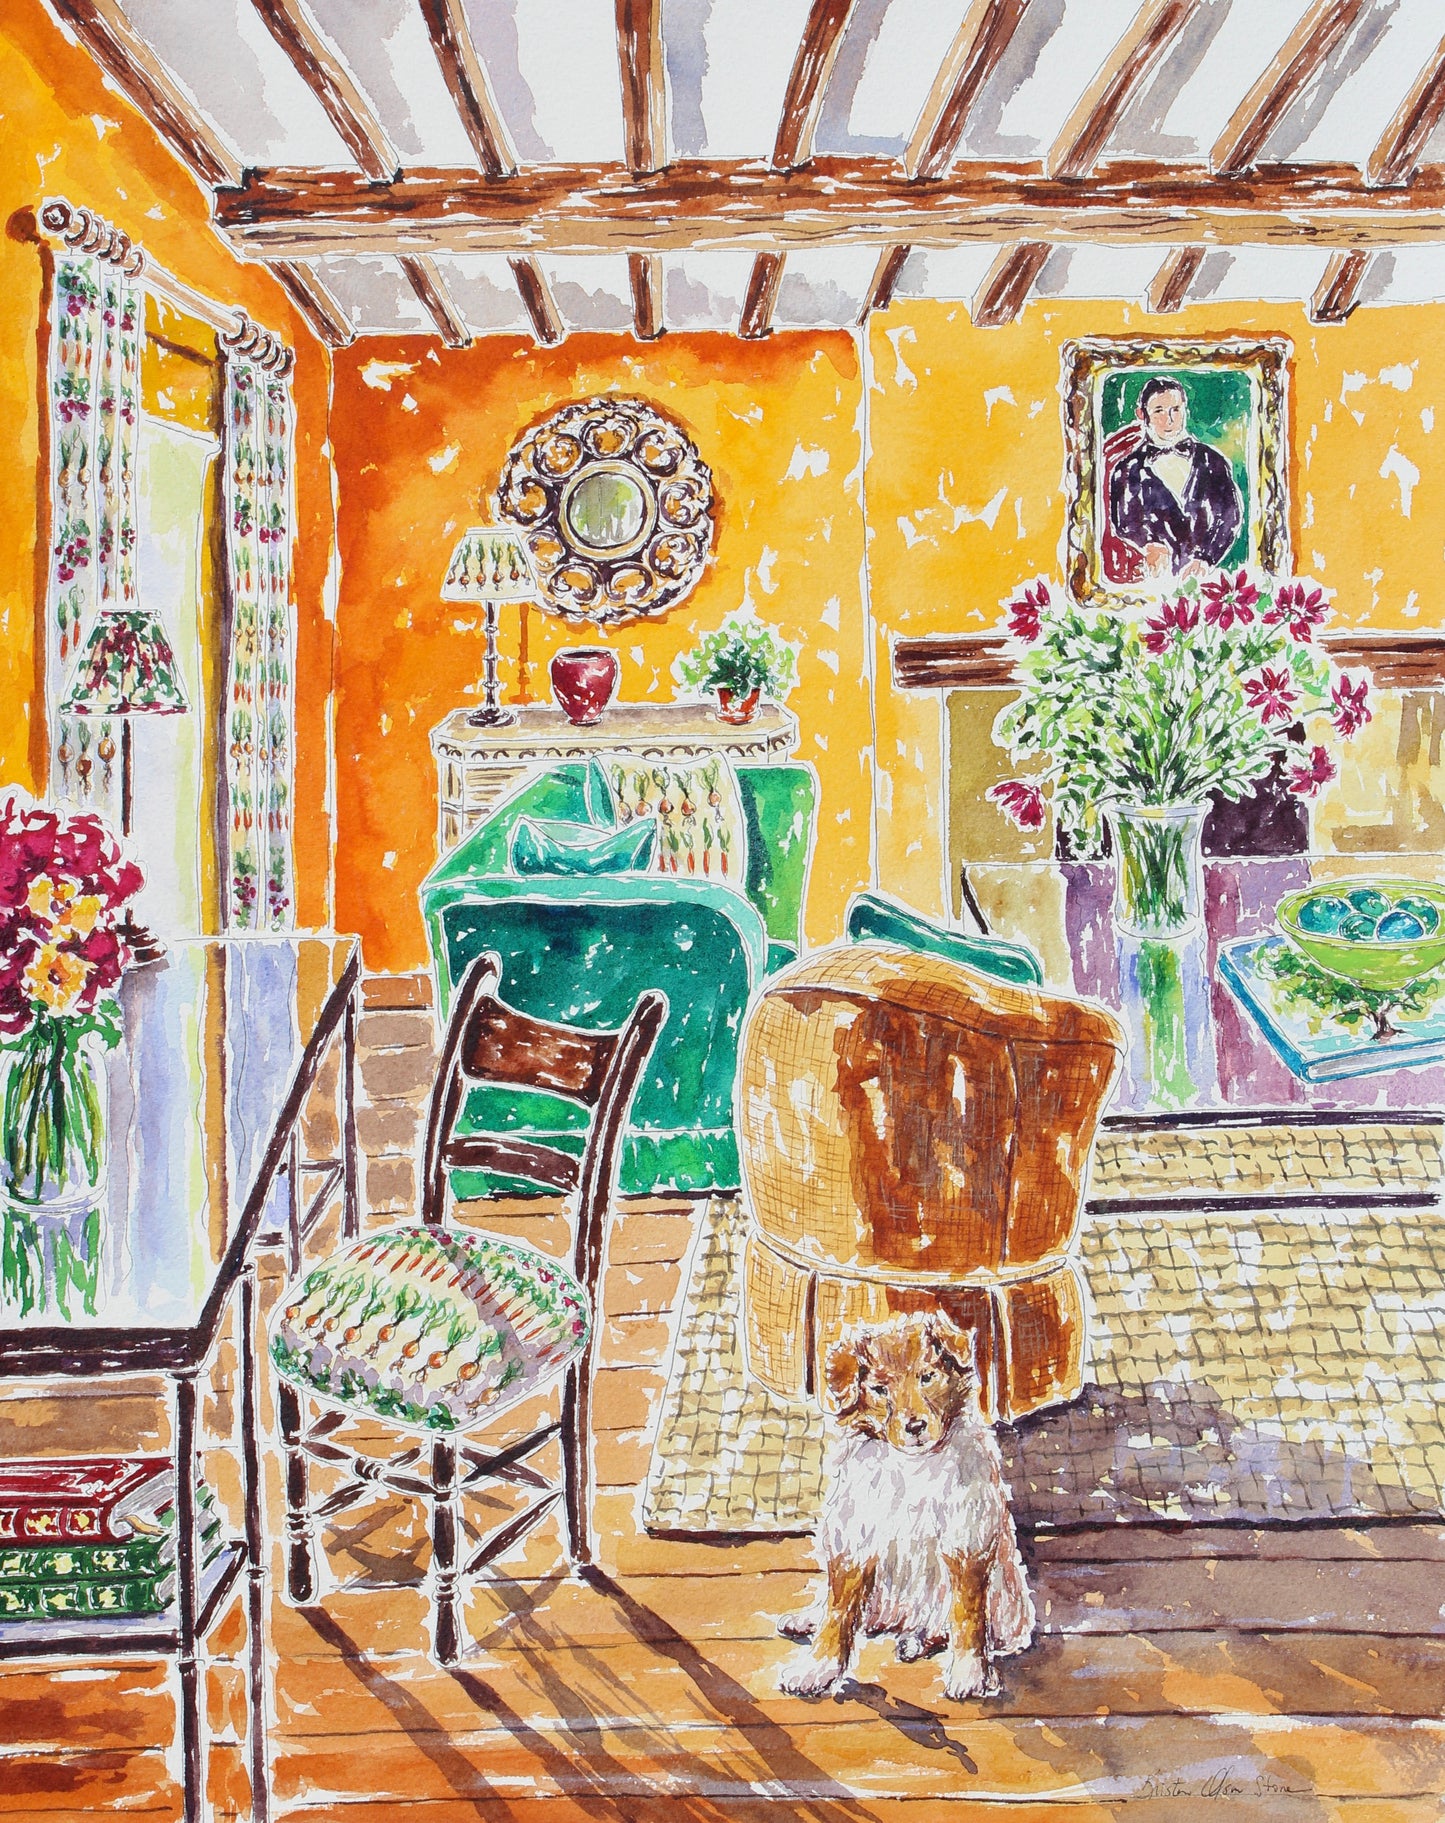 Miss Rev's Home Away From Home, An Original 20" x 16" Watercolor And Ink Painting Of An English Cottage With A Rough Collie